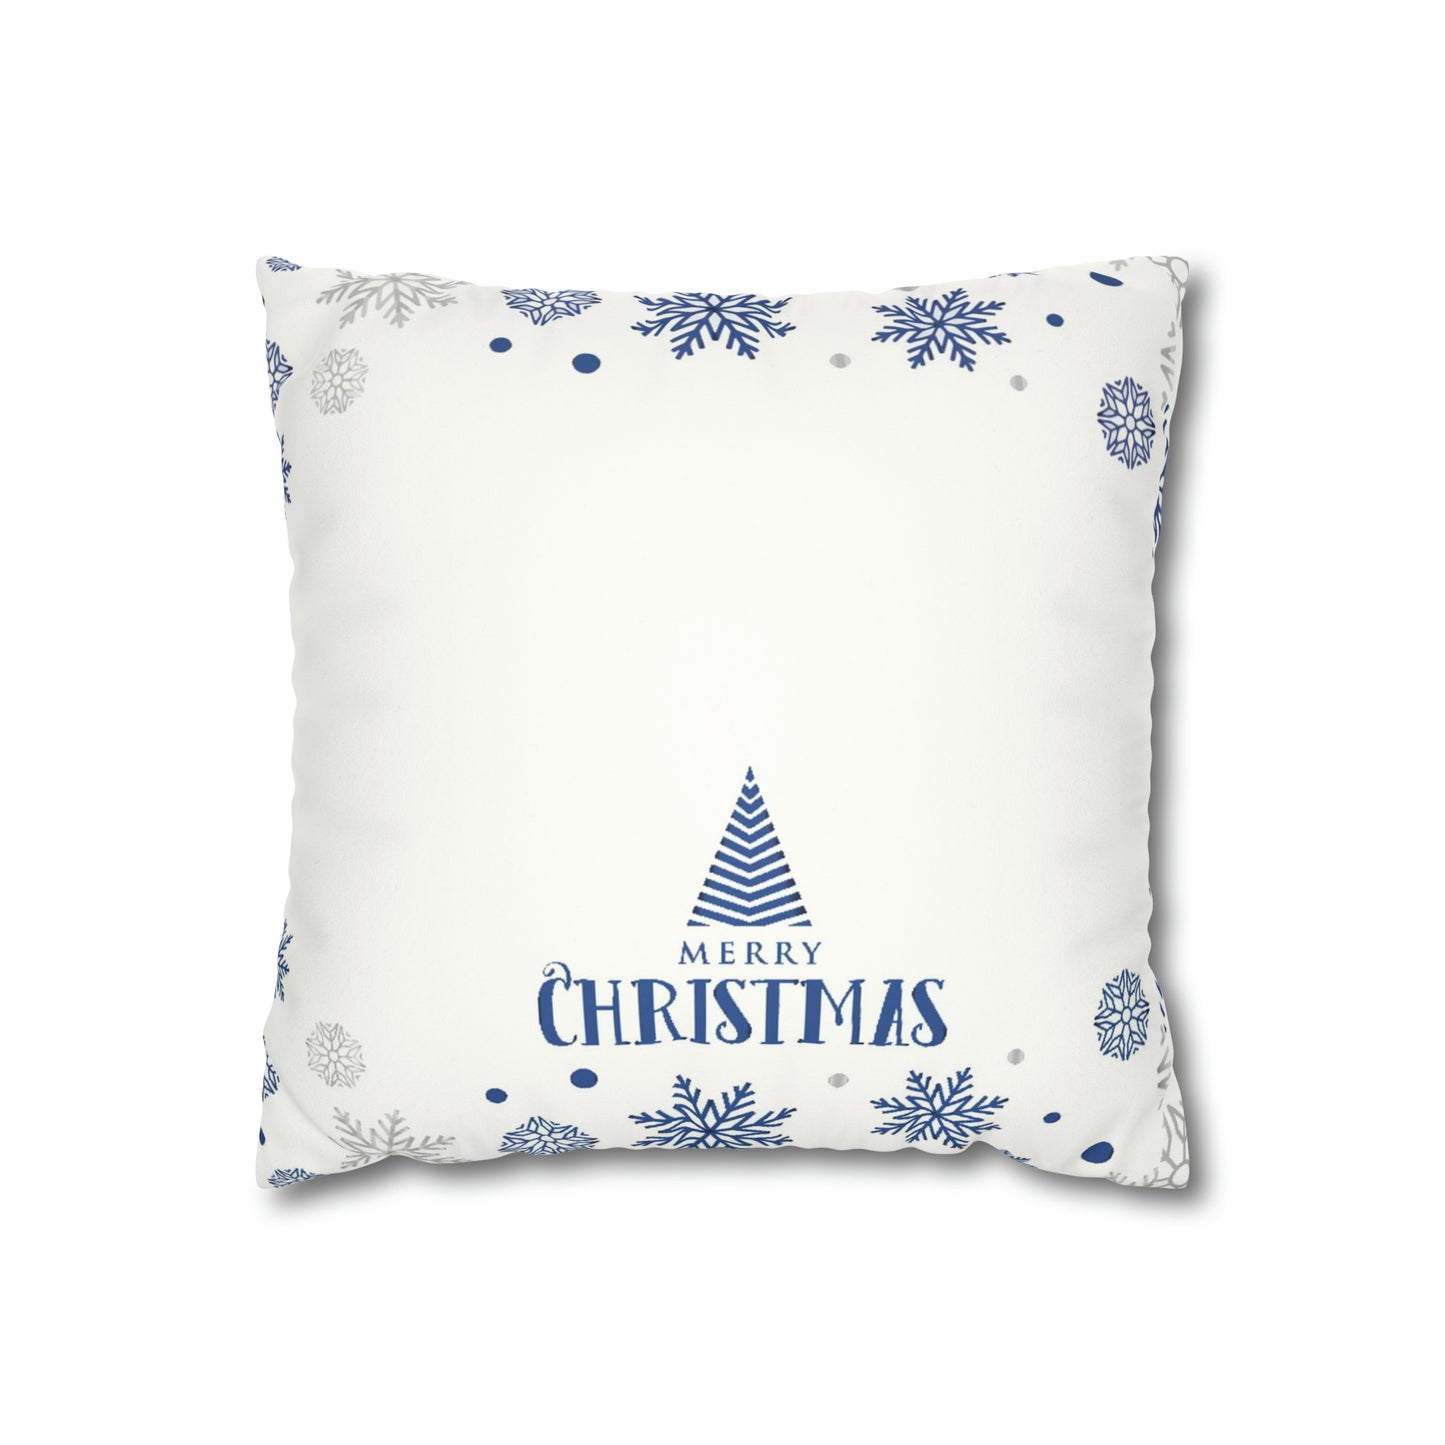 Merry Christmas Faux Suede Square Pillow Case, White